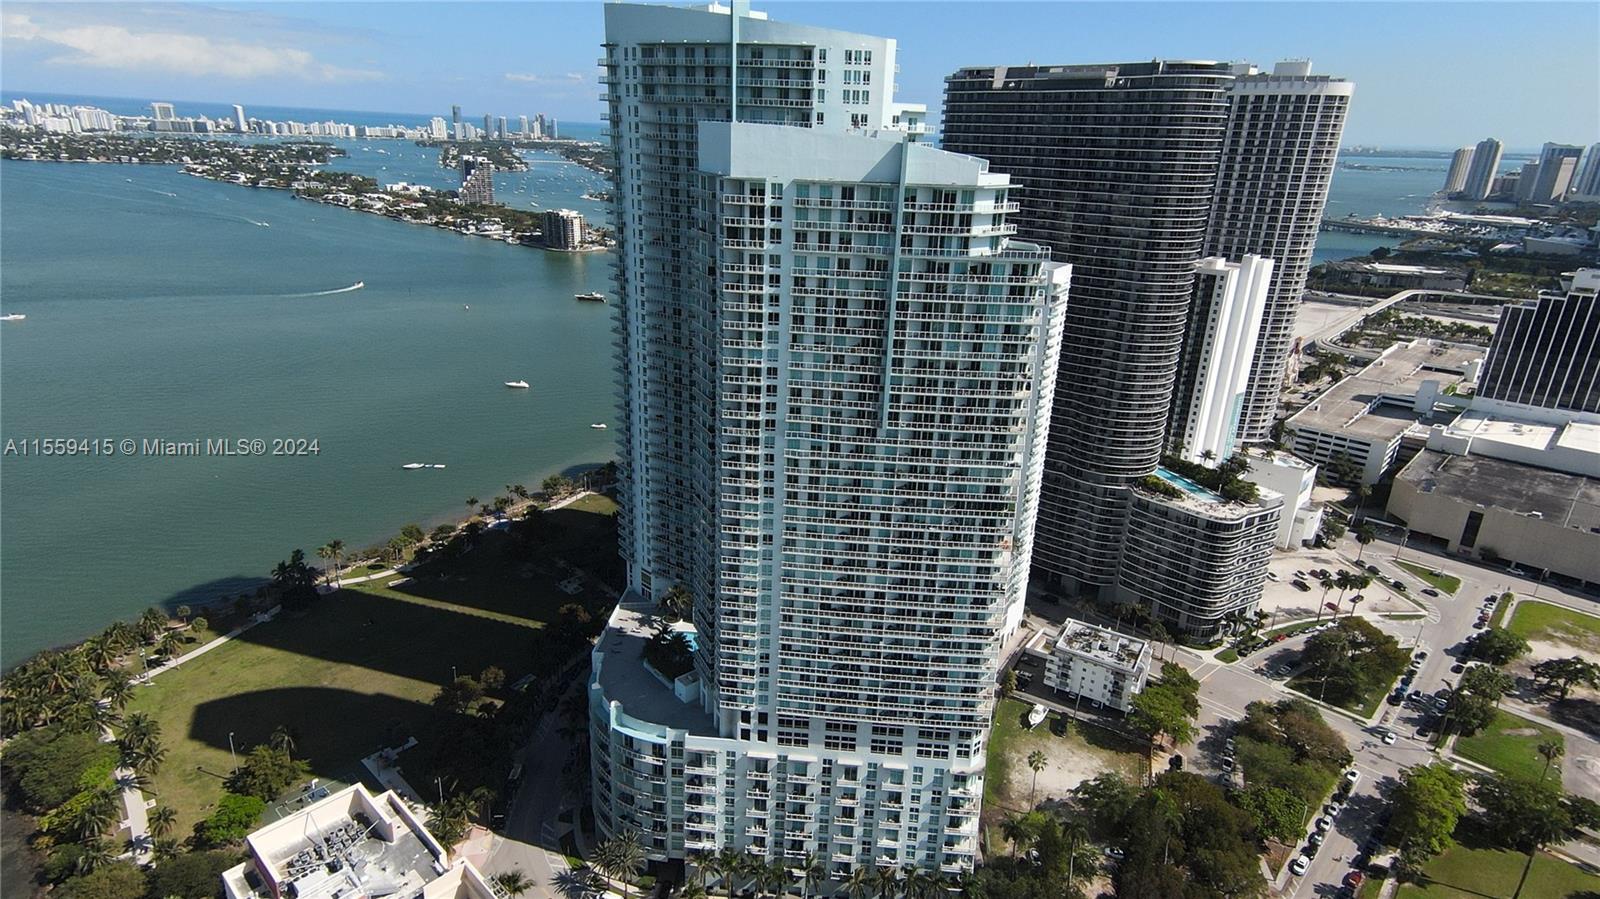 Enjoy the Miami urban lifestyle at its best from this stunning renovated fully furnished condo with breathtaking Bay Views from every room at the Resort Style Condo of Quantum on the Bay. The unit offers  2 suites with walk-in closets, a modern kitchen with European cabinets, quartz countertops stainless steel appliances, and a washer and dryer in the unit—oversized balcony, floor-to-ceiling windows, and elegant porcelain time floors throughout. Building amenities include 2 pools, 2 story gym with/ classes available, a theater, BBQ grills, a business room, a library, valet, 24-hour security, a mini market, a hair salon, a beauty center, and a full concierge & party room. Located near Downtown, Wynwood, Brickell, and beaches. The minimum rental period is 9 months. Available until 02.28.25